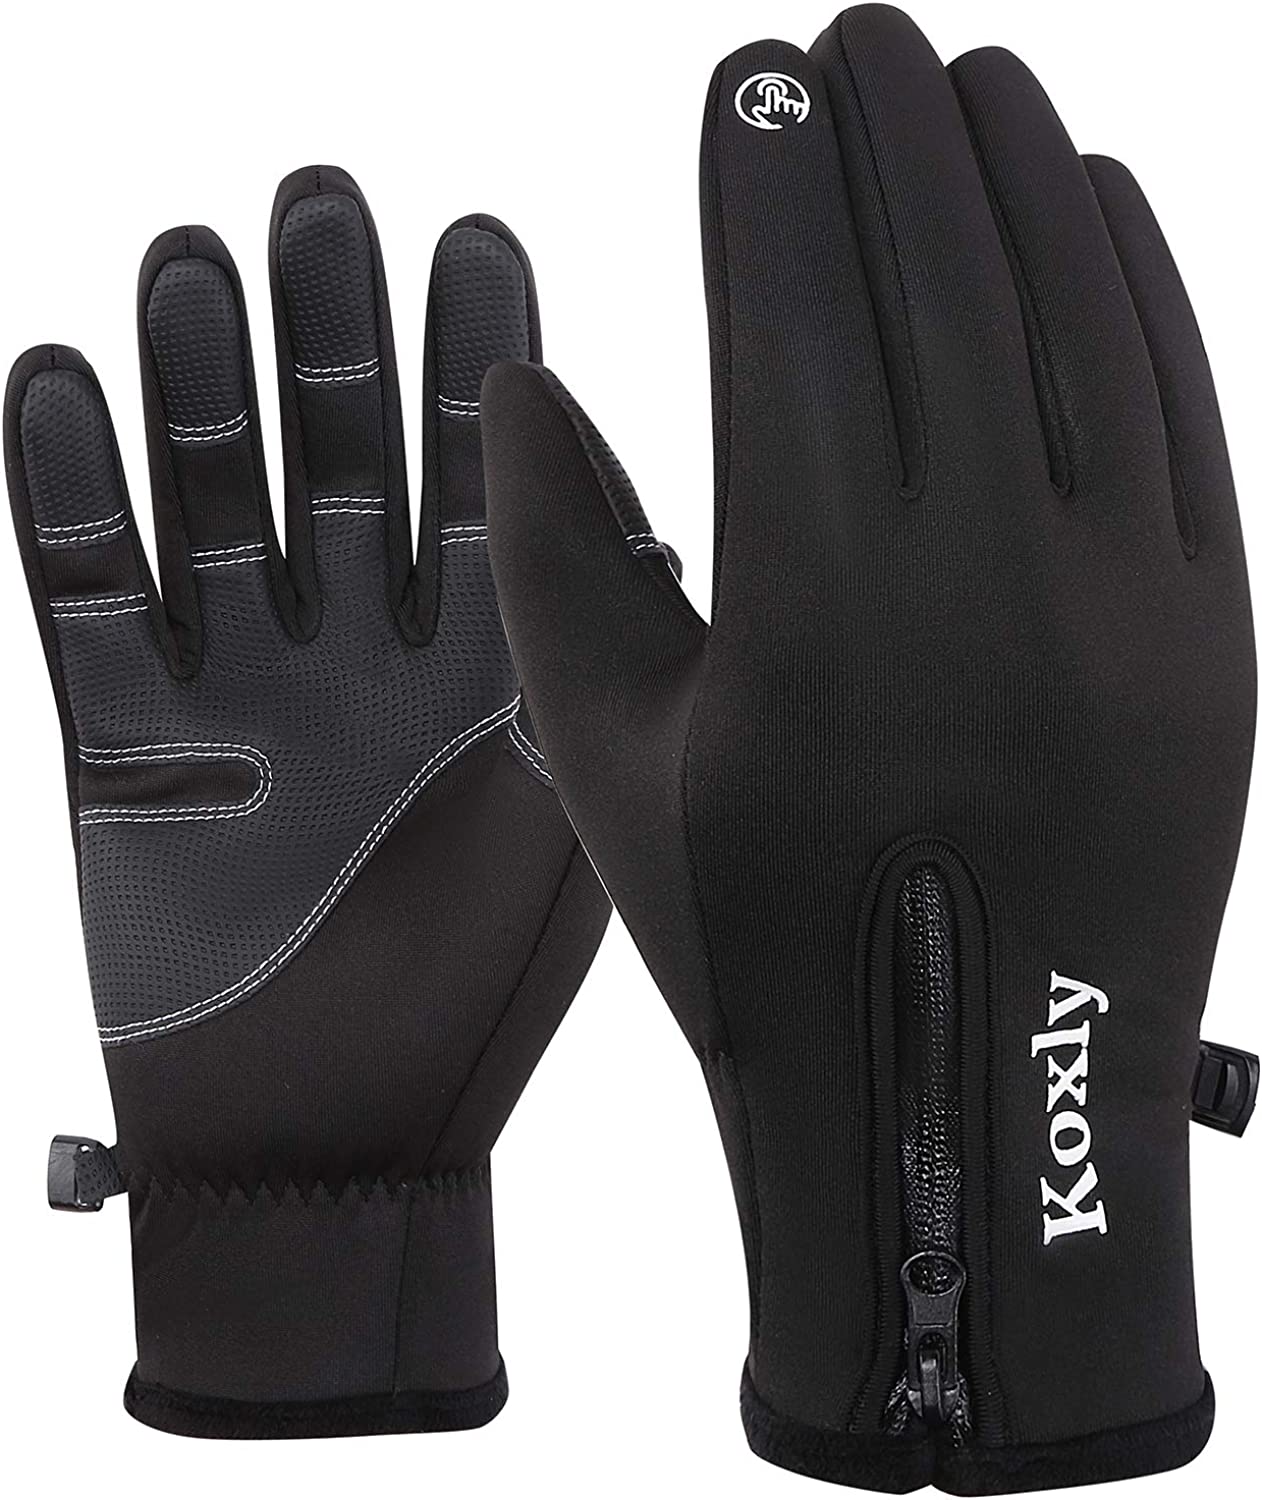 koxly winter touch screen fingers warm gloves